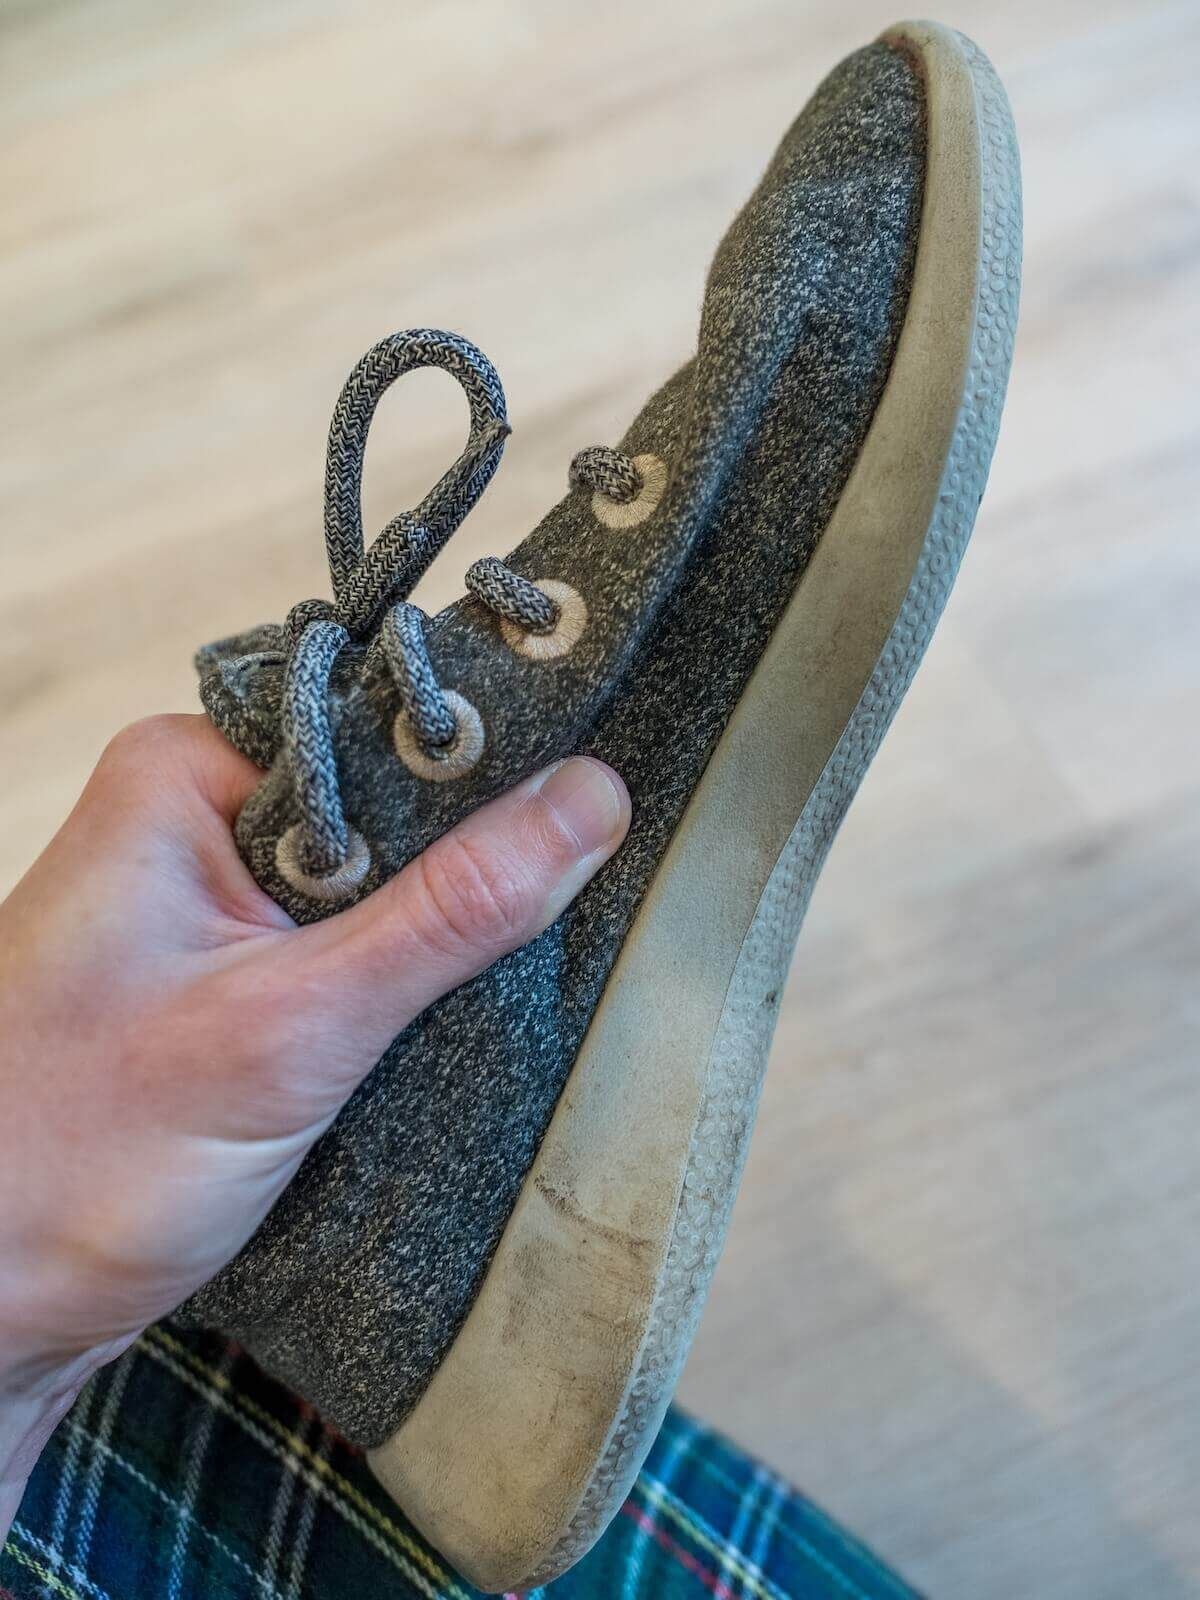 A hand holds a somewhat worn grey sneaker with a light hardwood floor behind it.